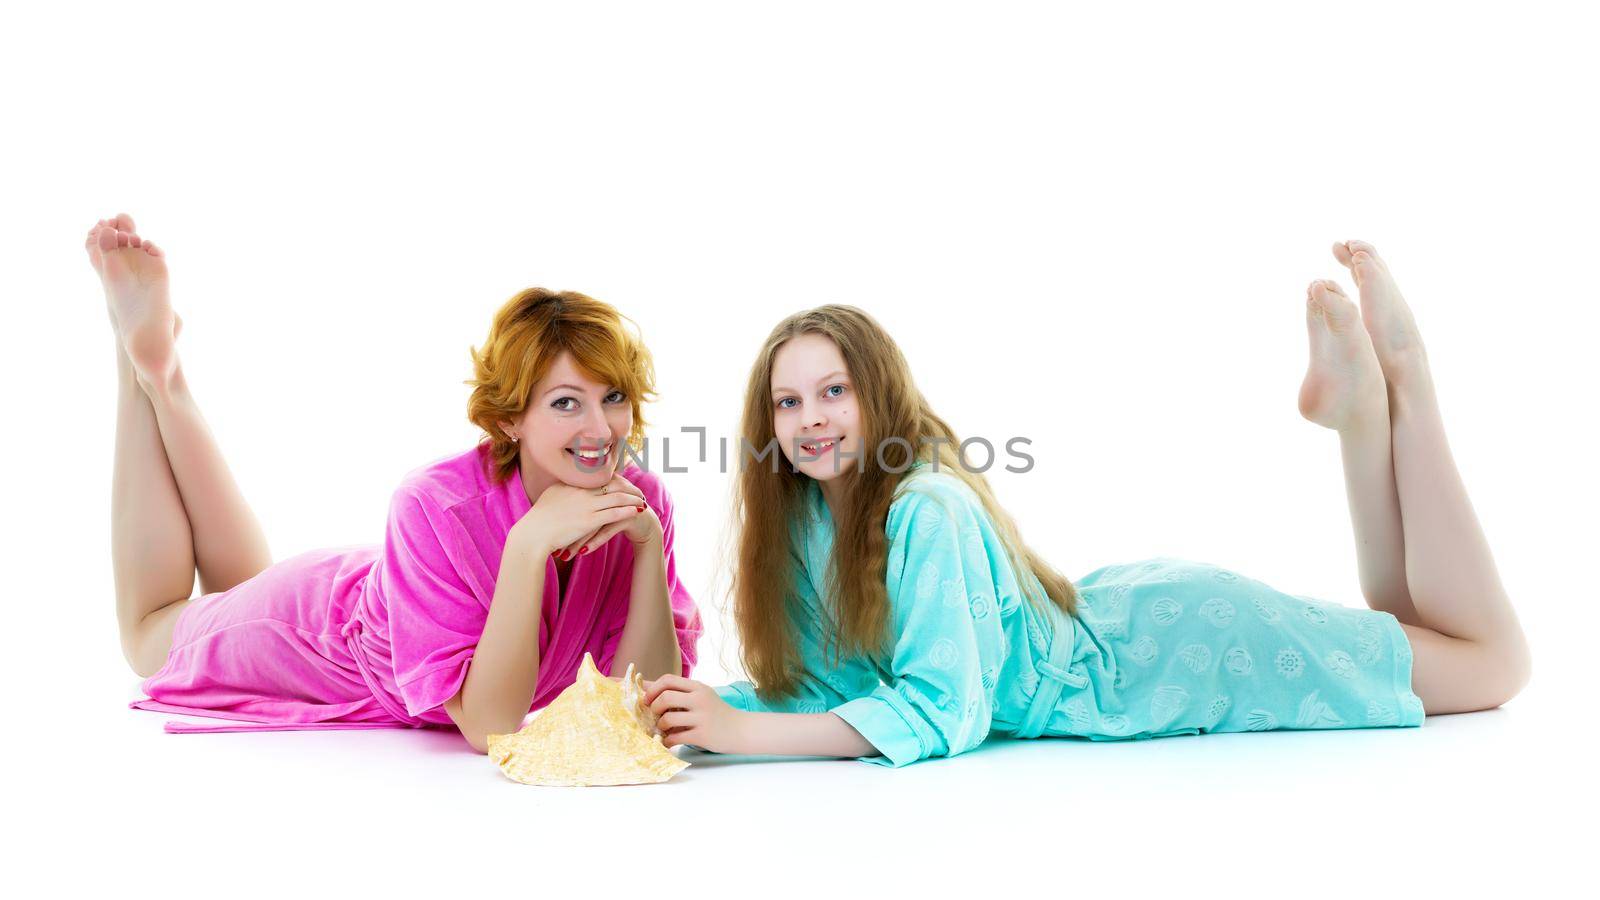 Daughter and mother in bathrobes posing in the studio. The conce by kolesnikov_studio